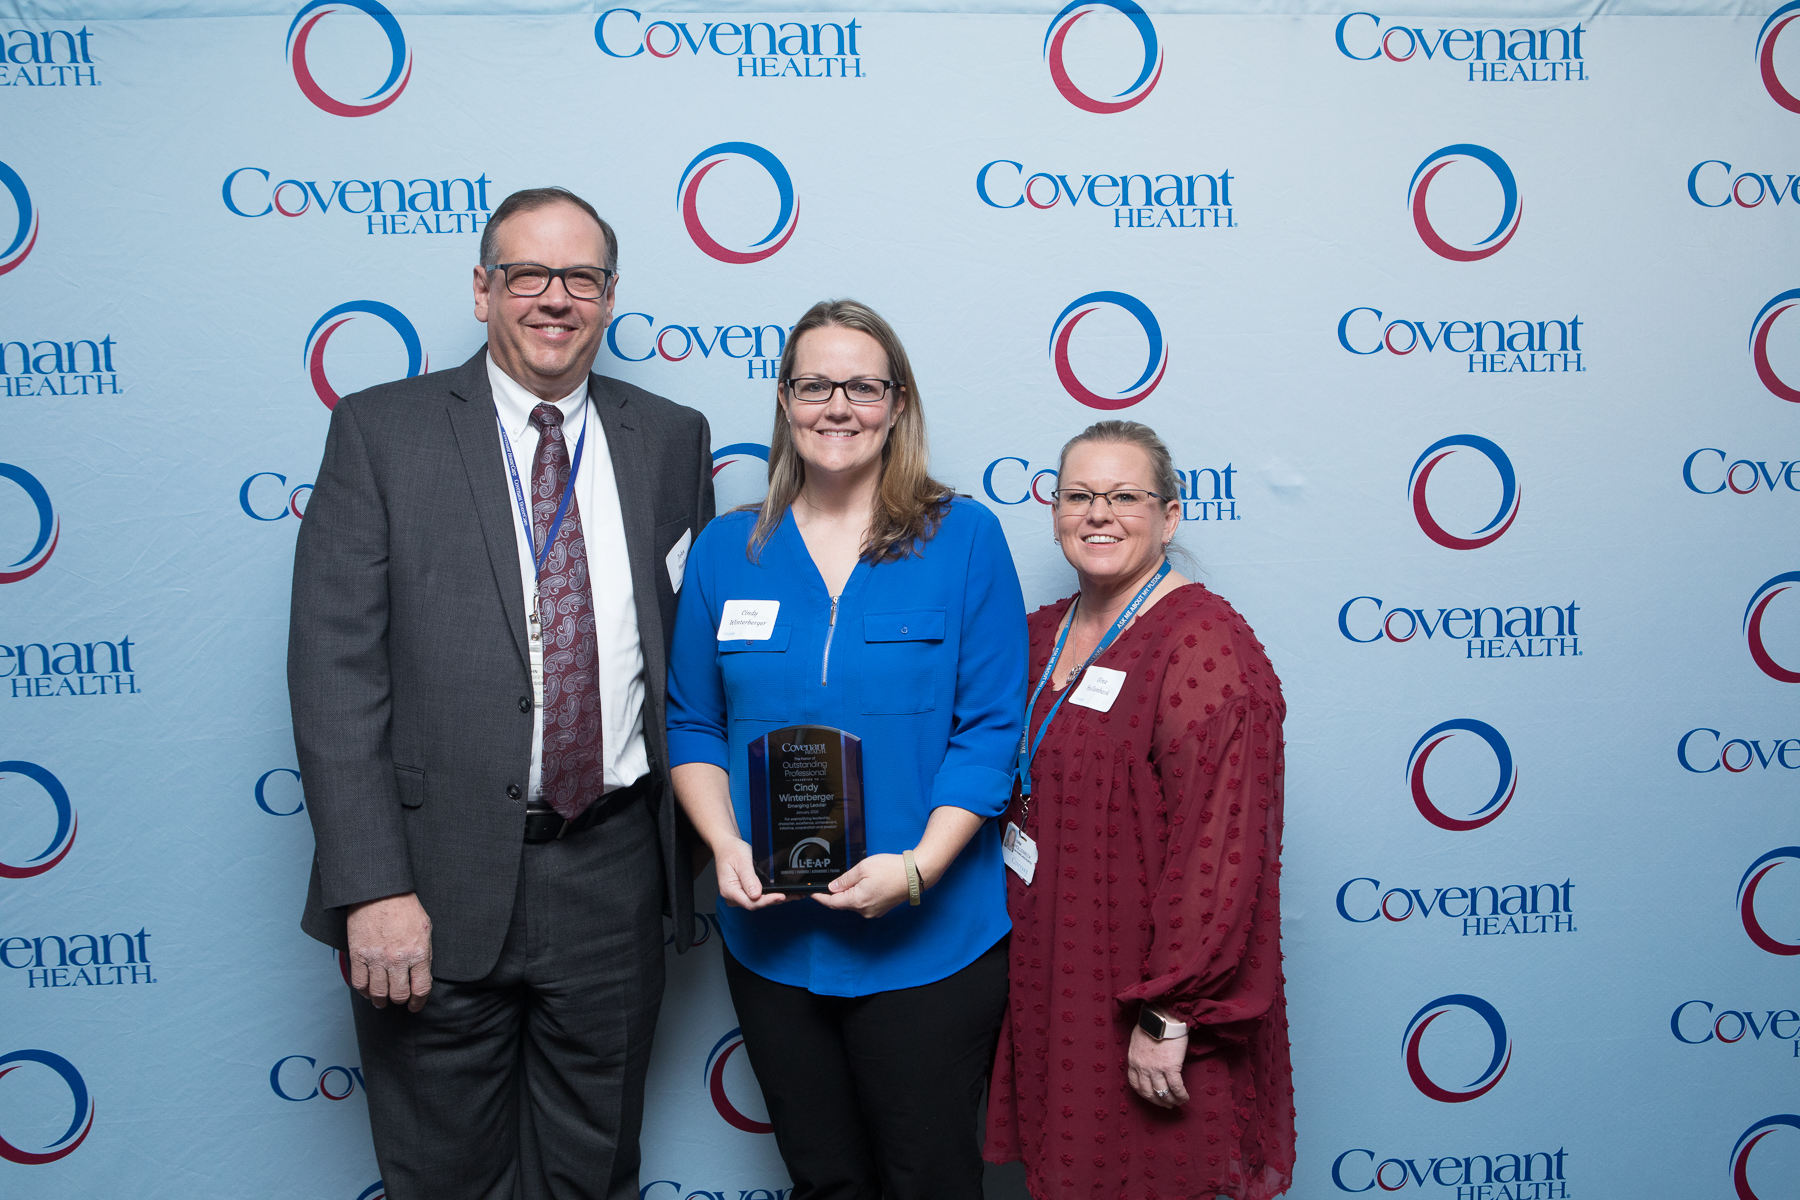 Covenant Health Graduates First Class of Emerging Leaders - Covenant Health